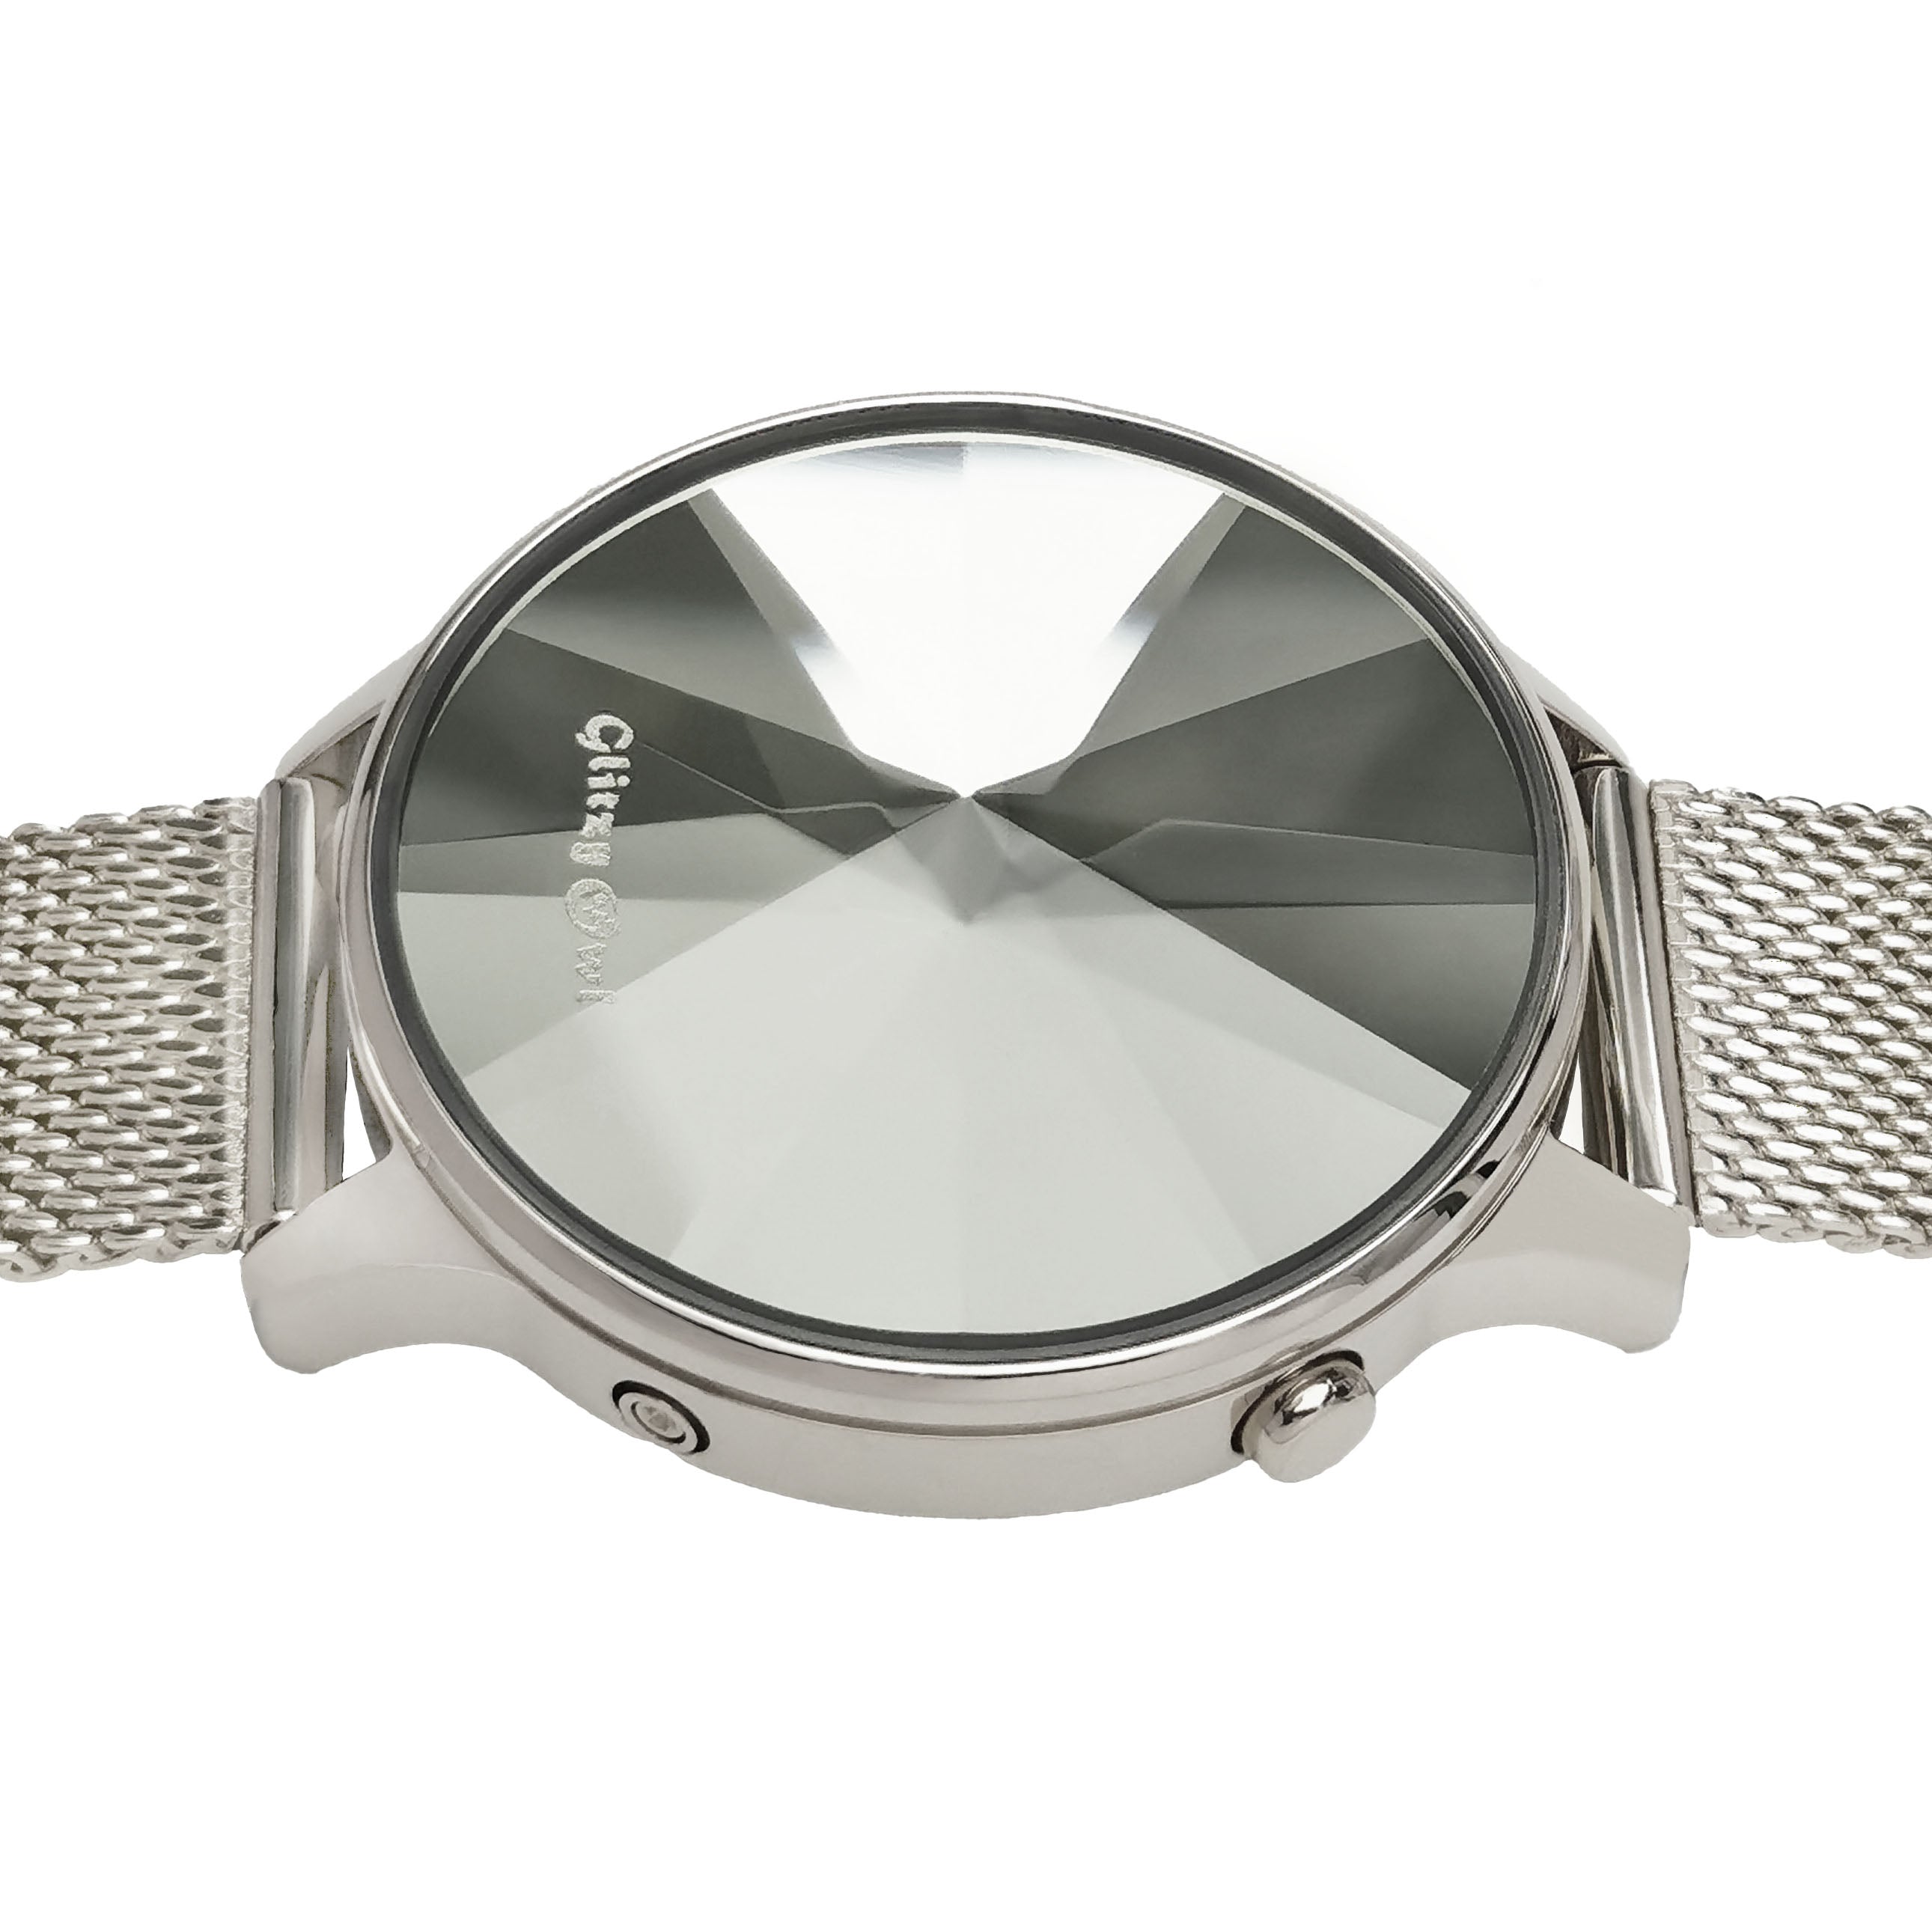 THE DIAMOND LED Stainless Steel Watch